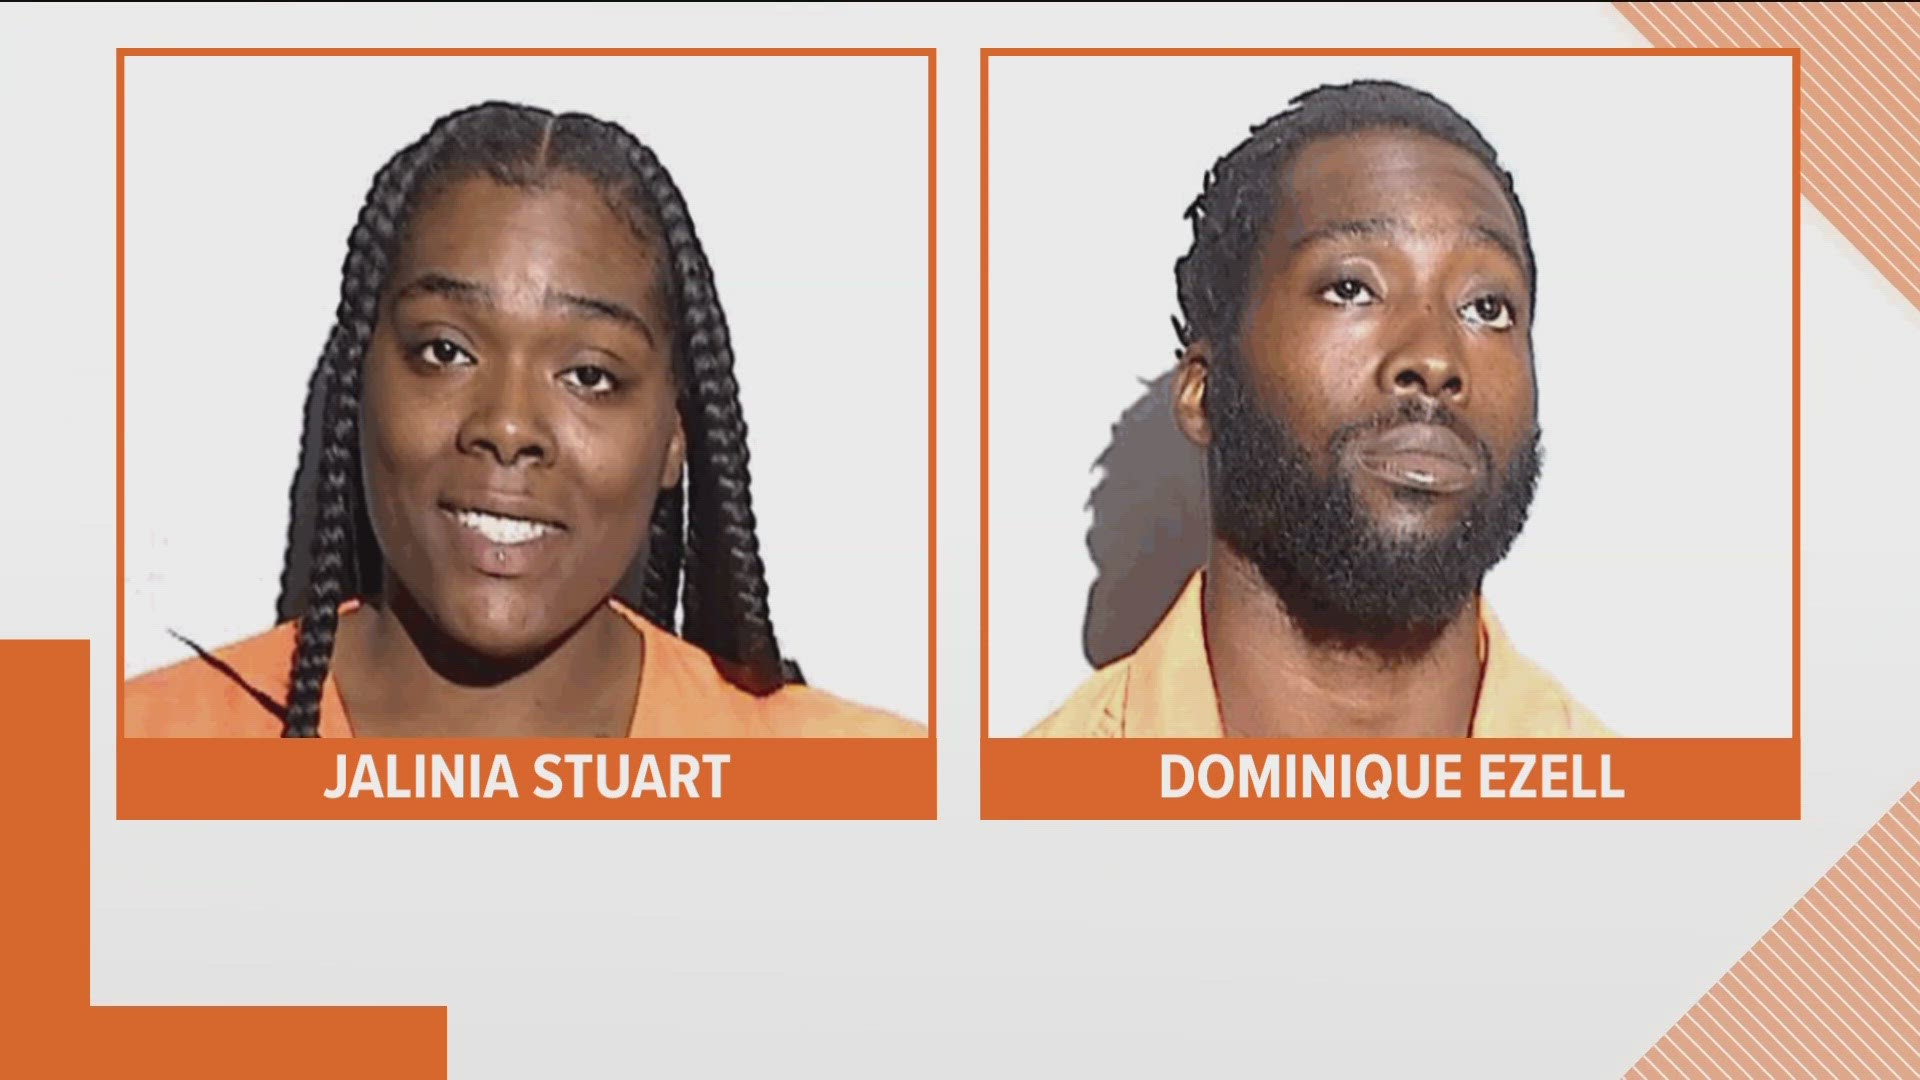 Jalinia Stuart and Dominique Ezell allegedly attacked employees and damaged restaurant property after not receiving cheese on a Crispy Chicken Sandwich.